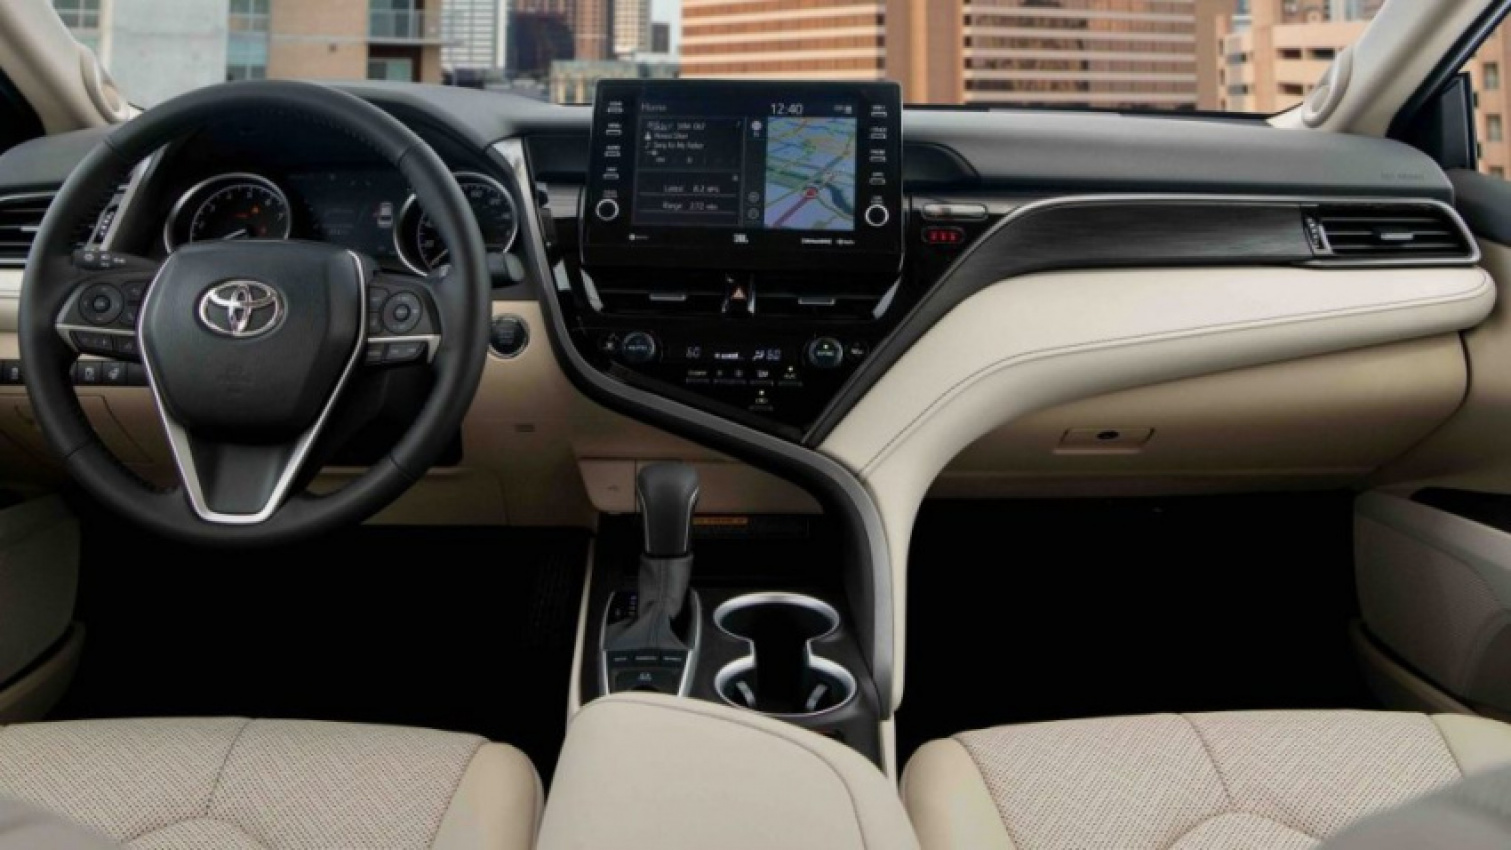 autos, cars, toyota, android, camry, sedans, toyota camry, toytoa, vnex, android, the new 2022 toyota camry offers the advanced technology more drivers search for